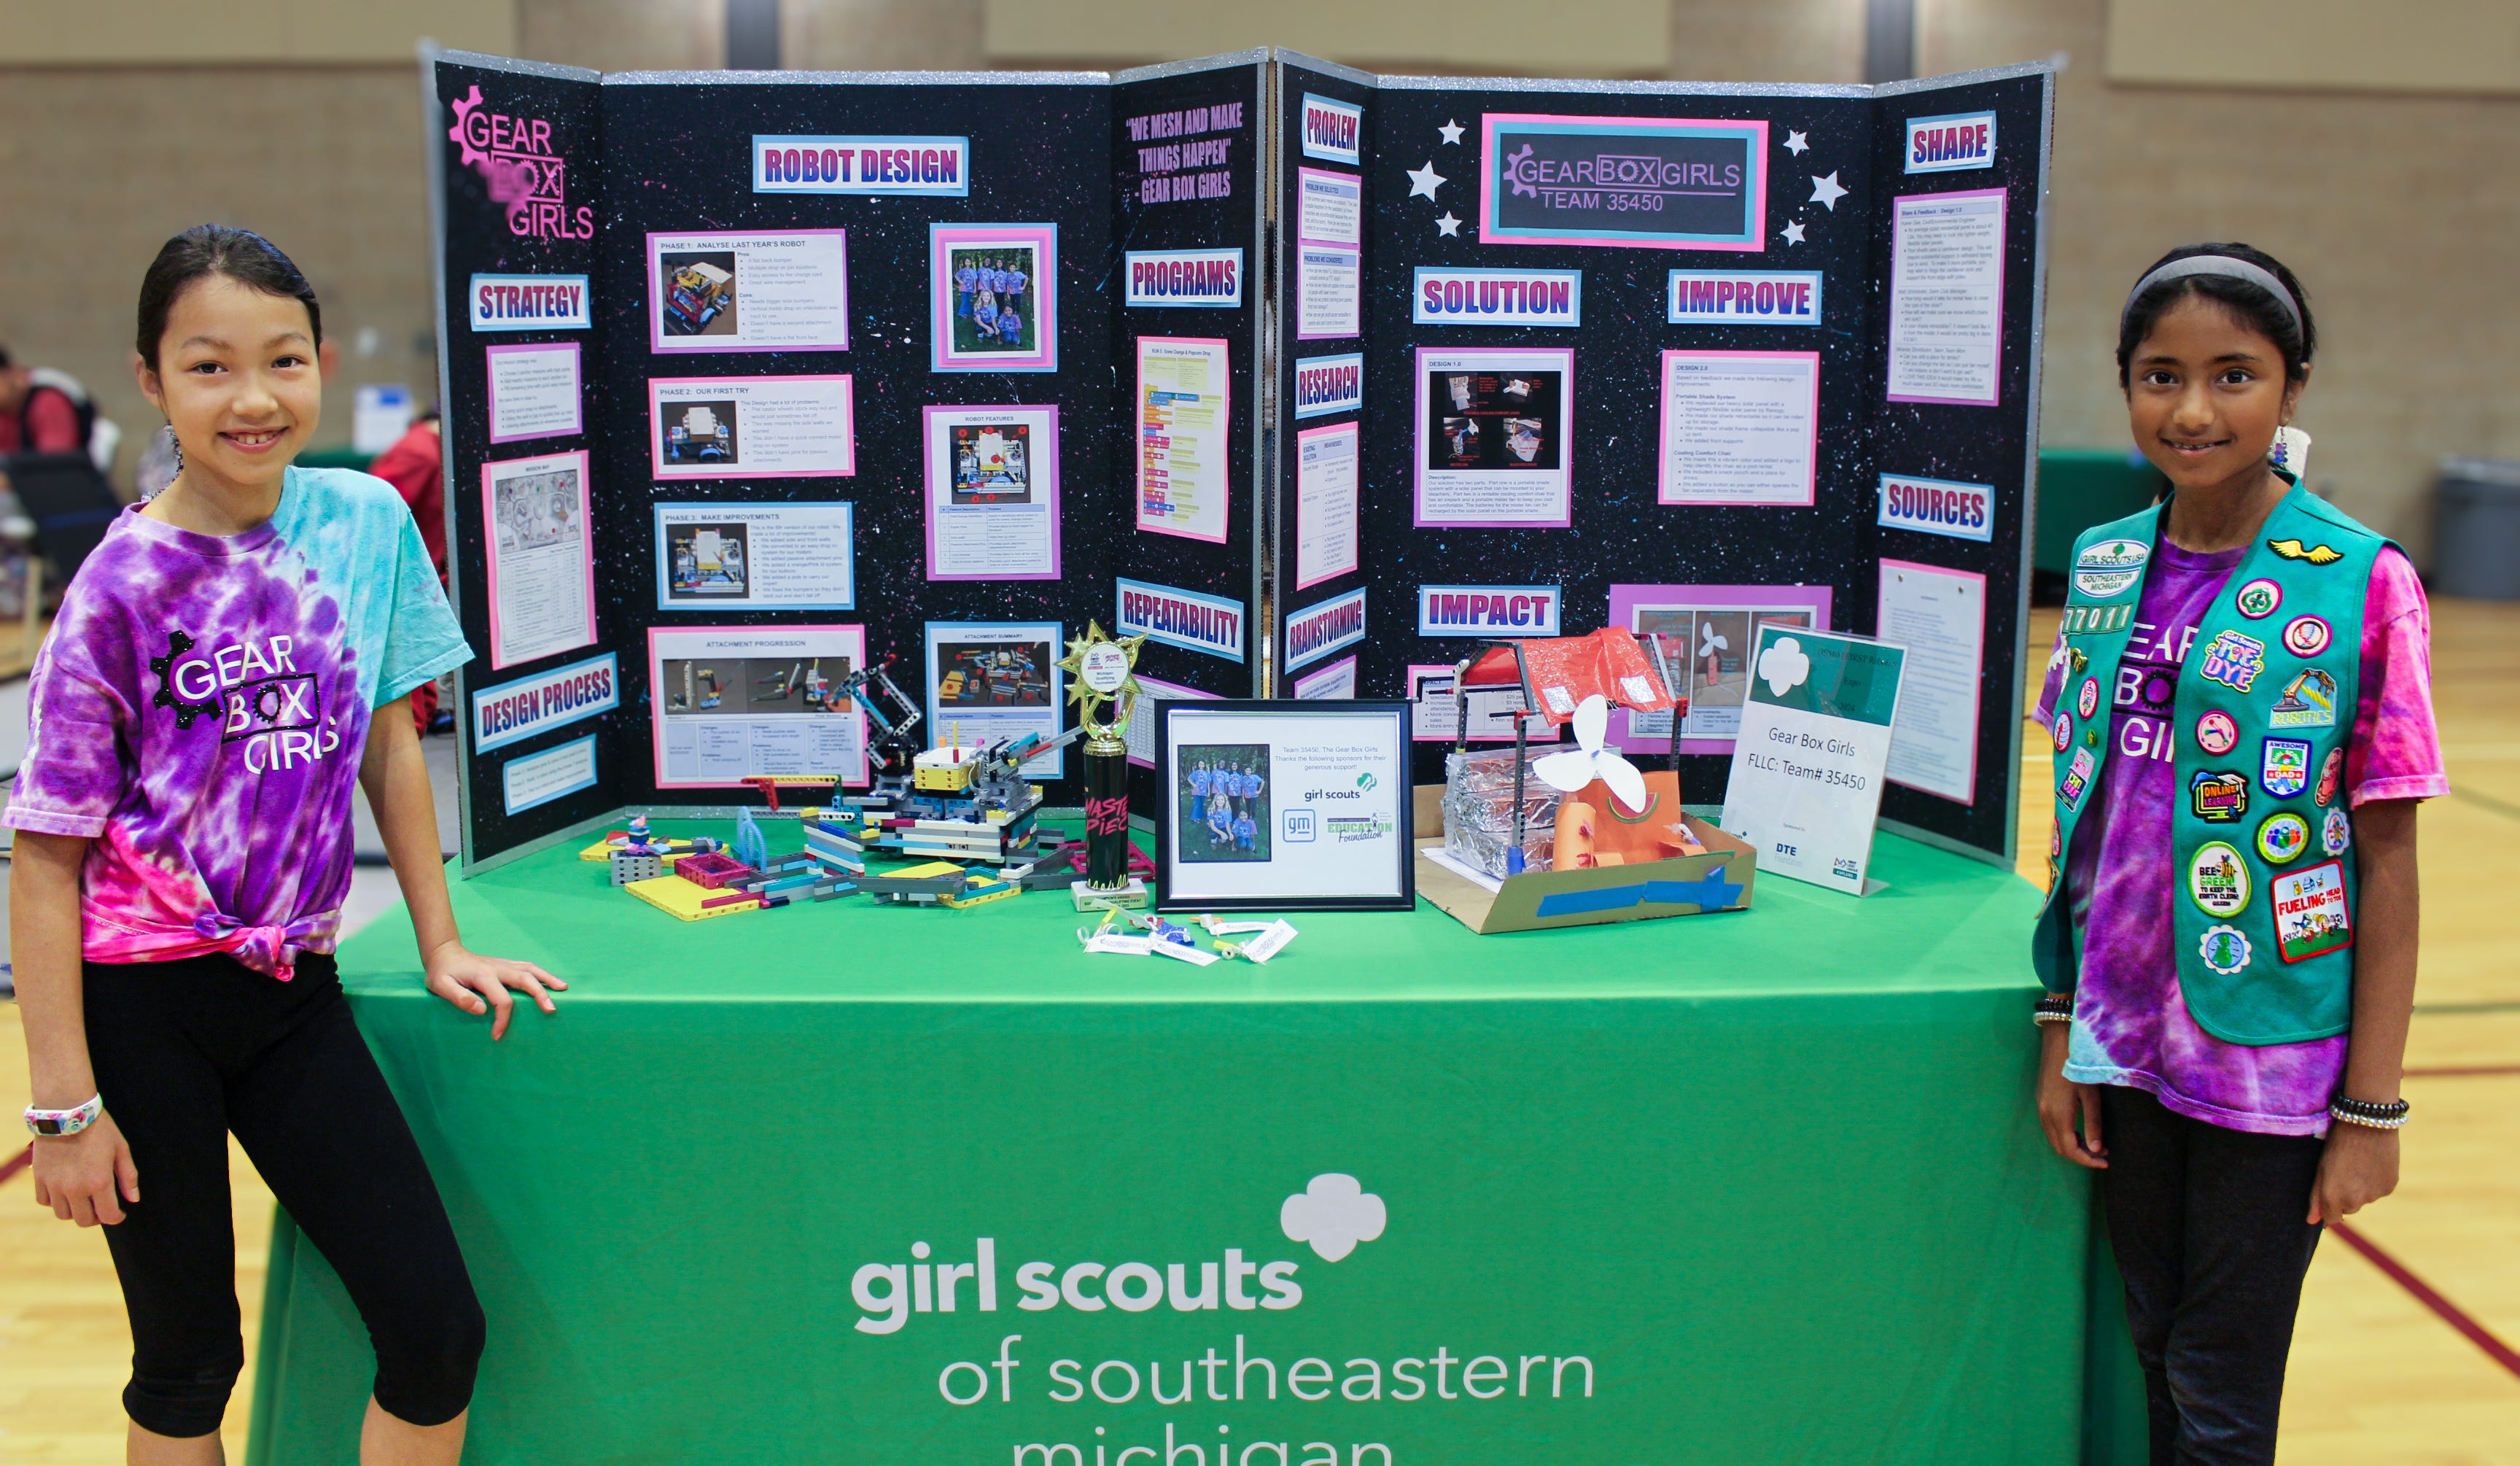 Katie Gee (left) and Navika Anil, representing the FIRST LEGO League Challenge Team 35450, also known as the "Gear Box Girls," demonstrate the important principles that drive a robotics team during a May 4 Robotics Expo presented by the Girls Scouts of Southeastern Michigan and FIRST (For Inspiration and Recognition of Science and Techology) Michigan.